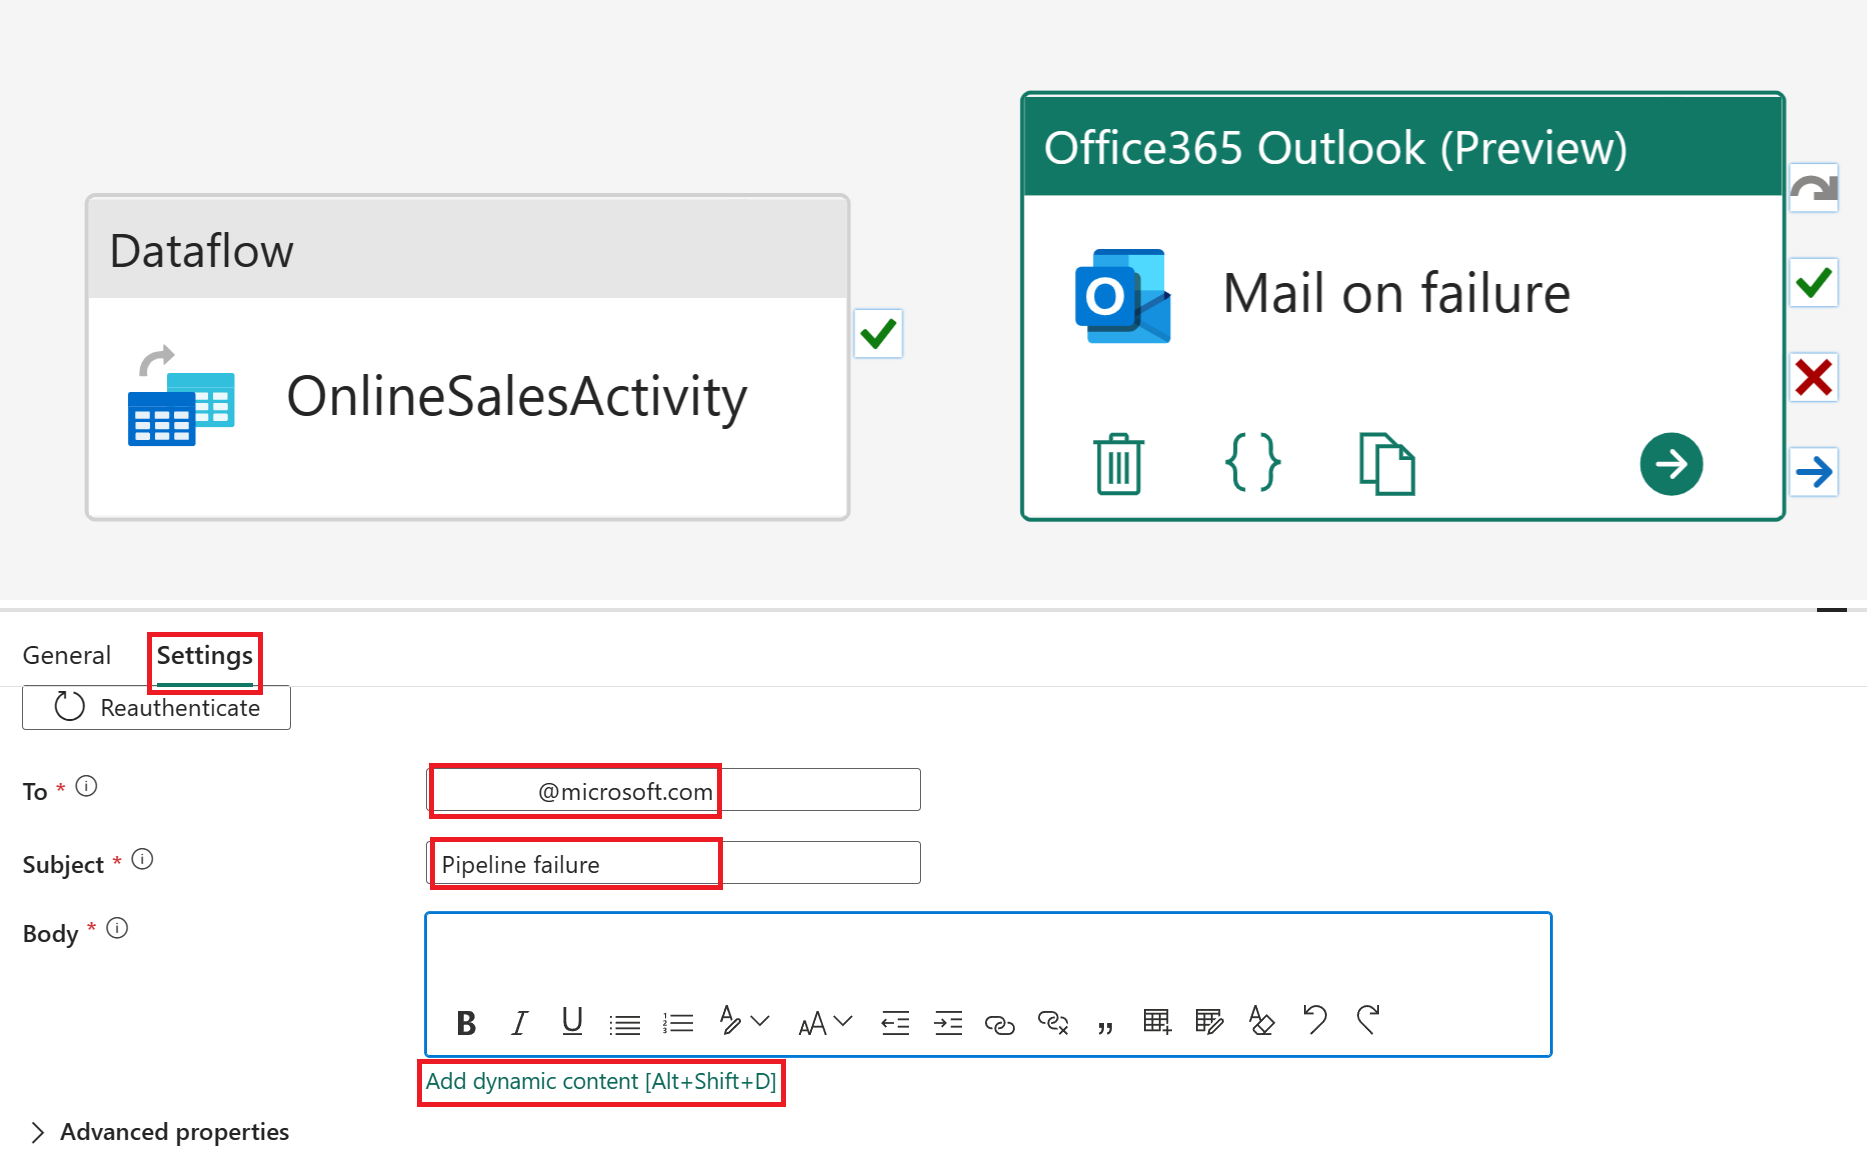 Screenshot of the Office365 Outlook settings.